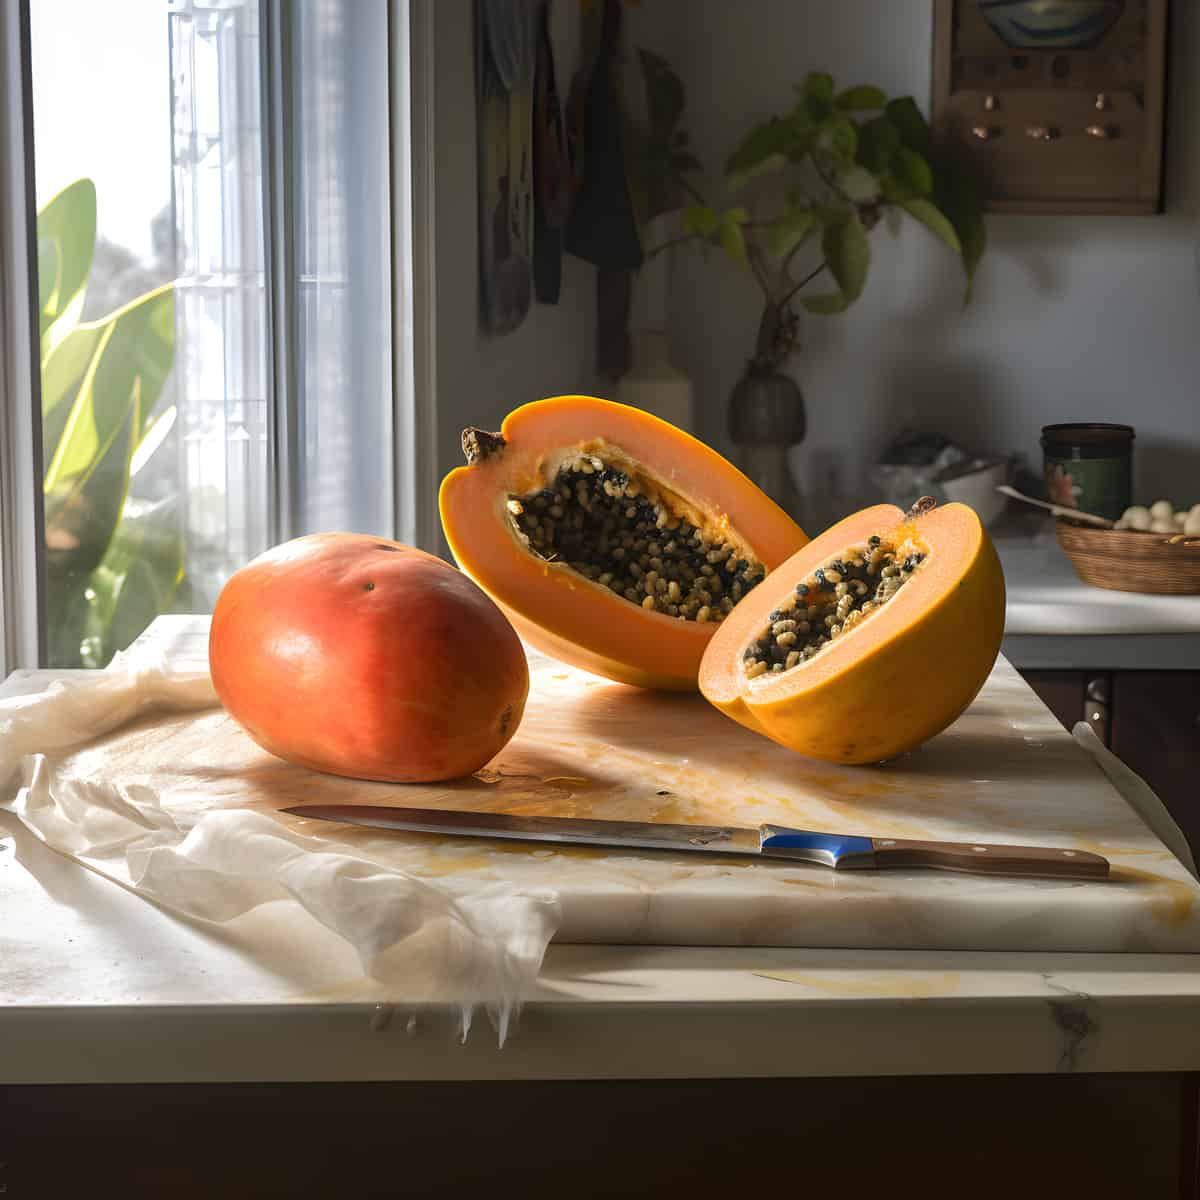 Pawpaw on a kitchen counter